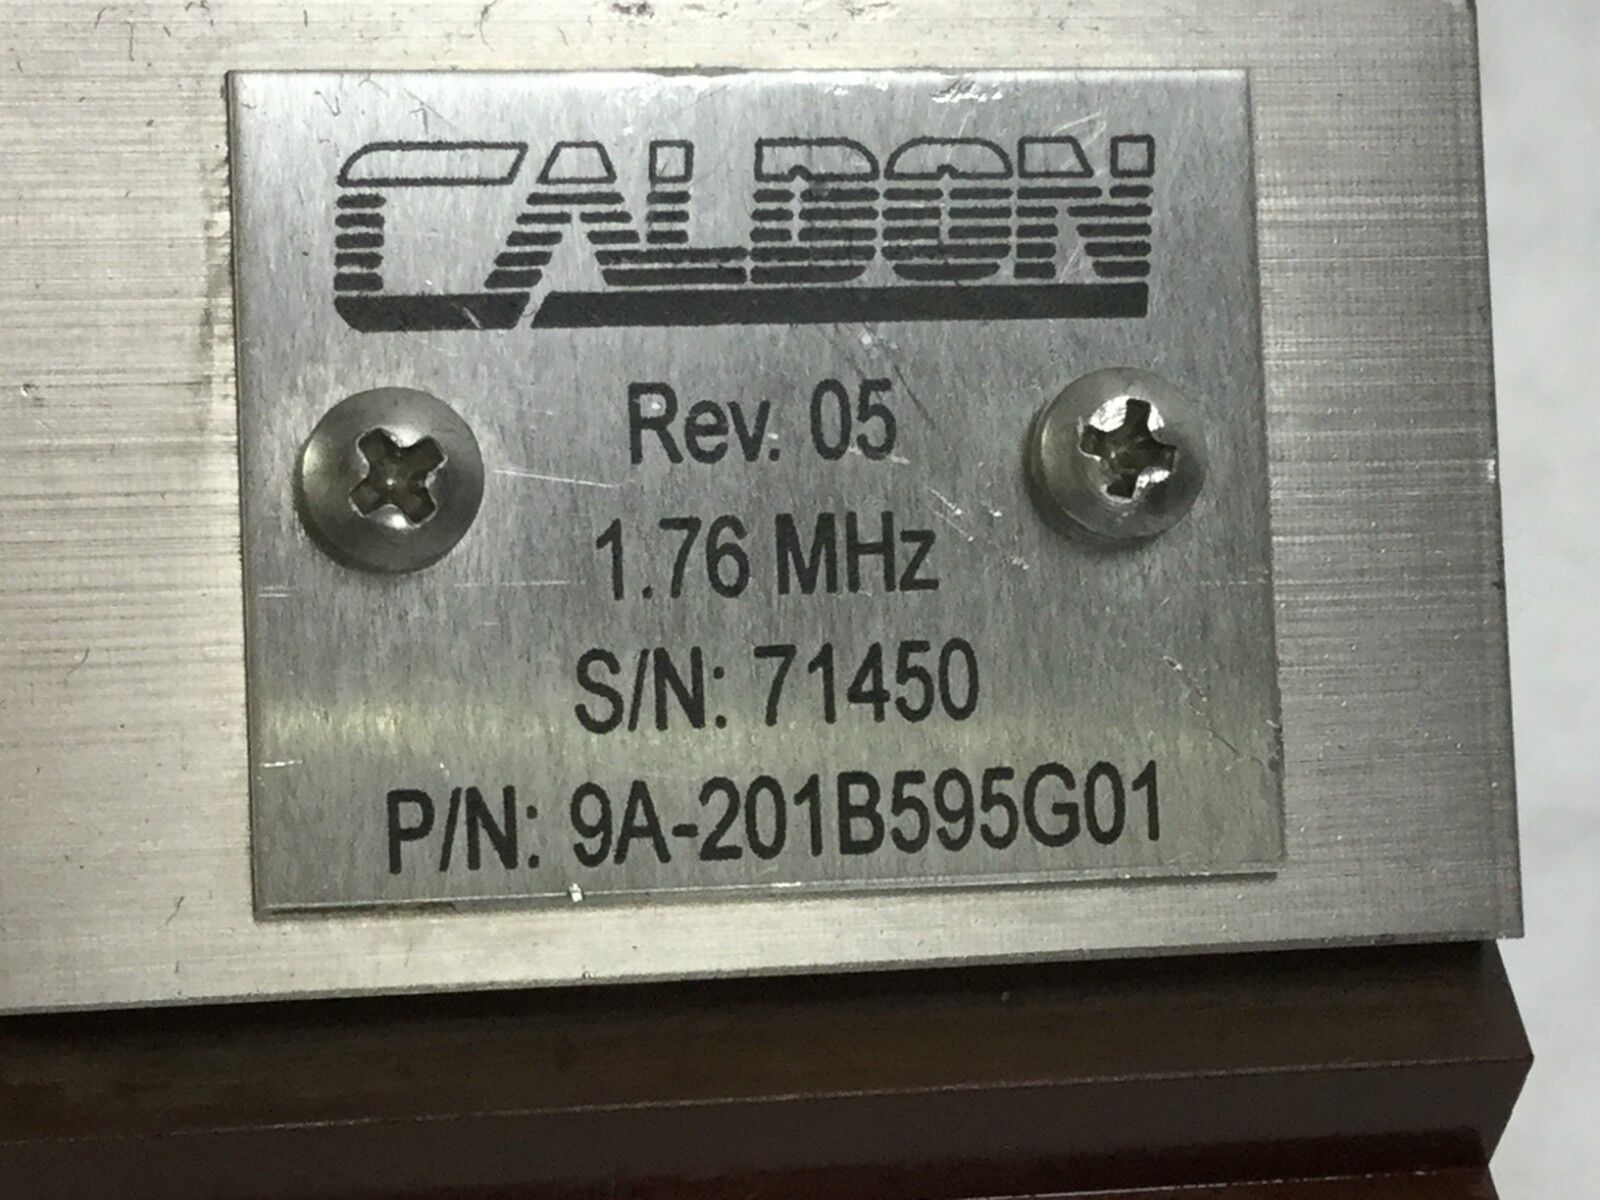 Caldon 9A-201B595G01 1.76 MHz  CW 8017  OW 37.95  HW .636  Untested